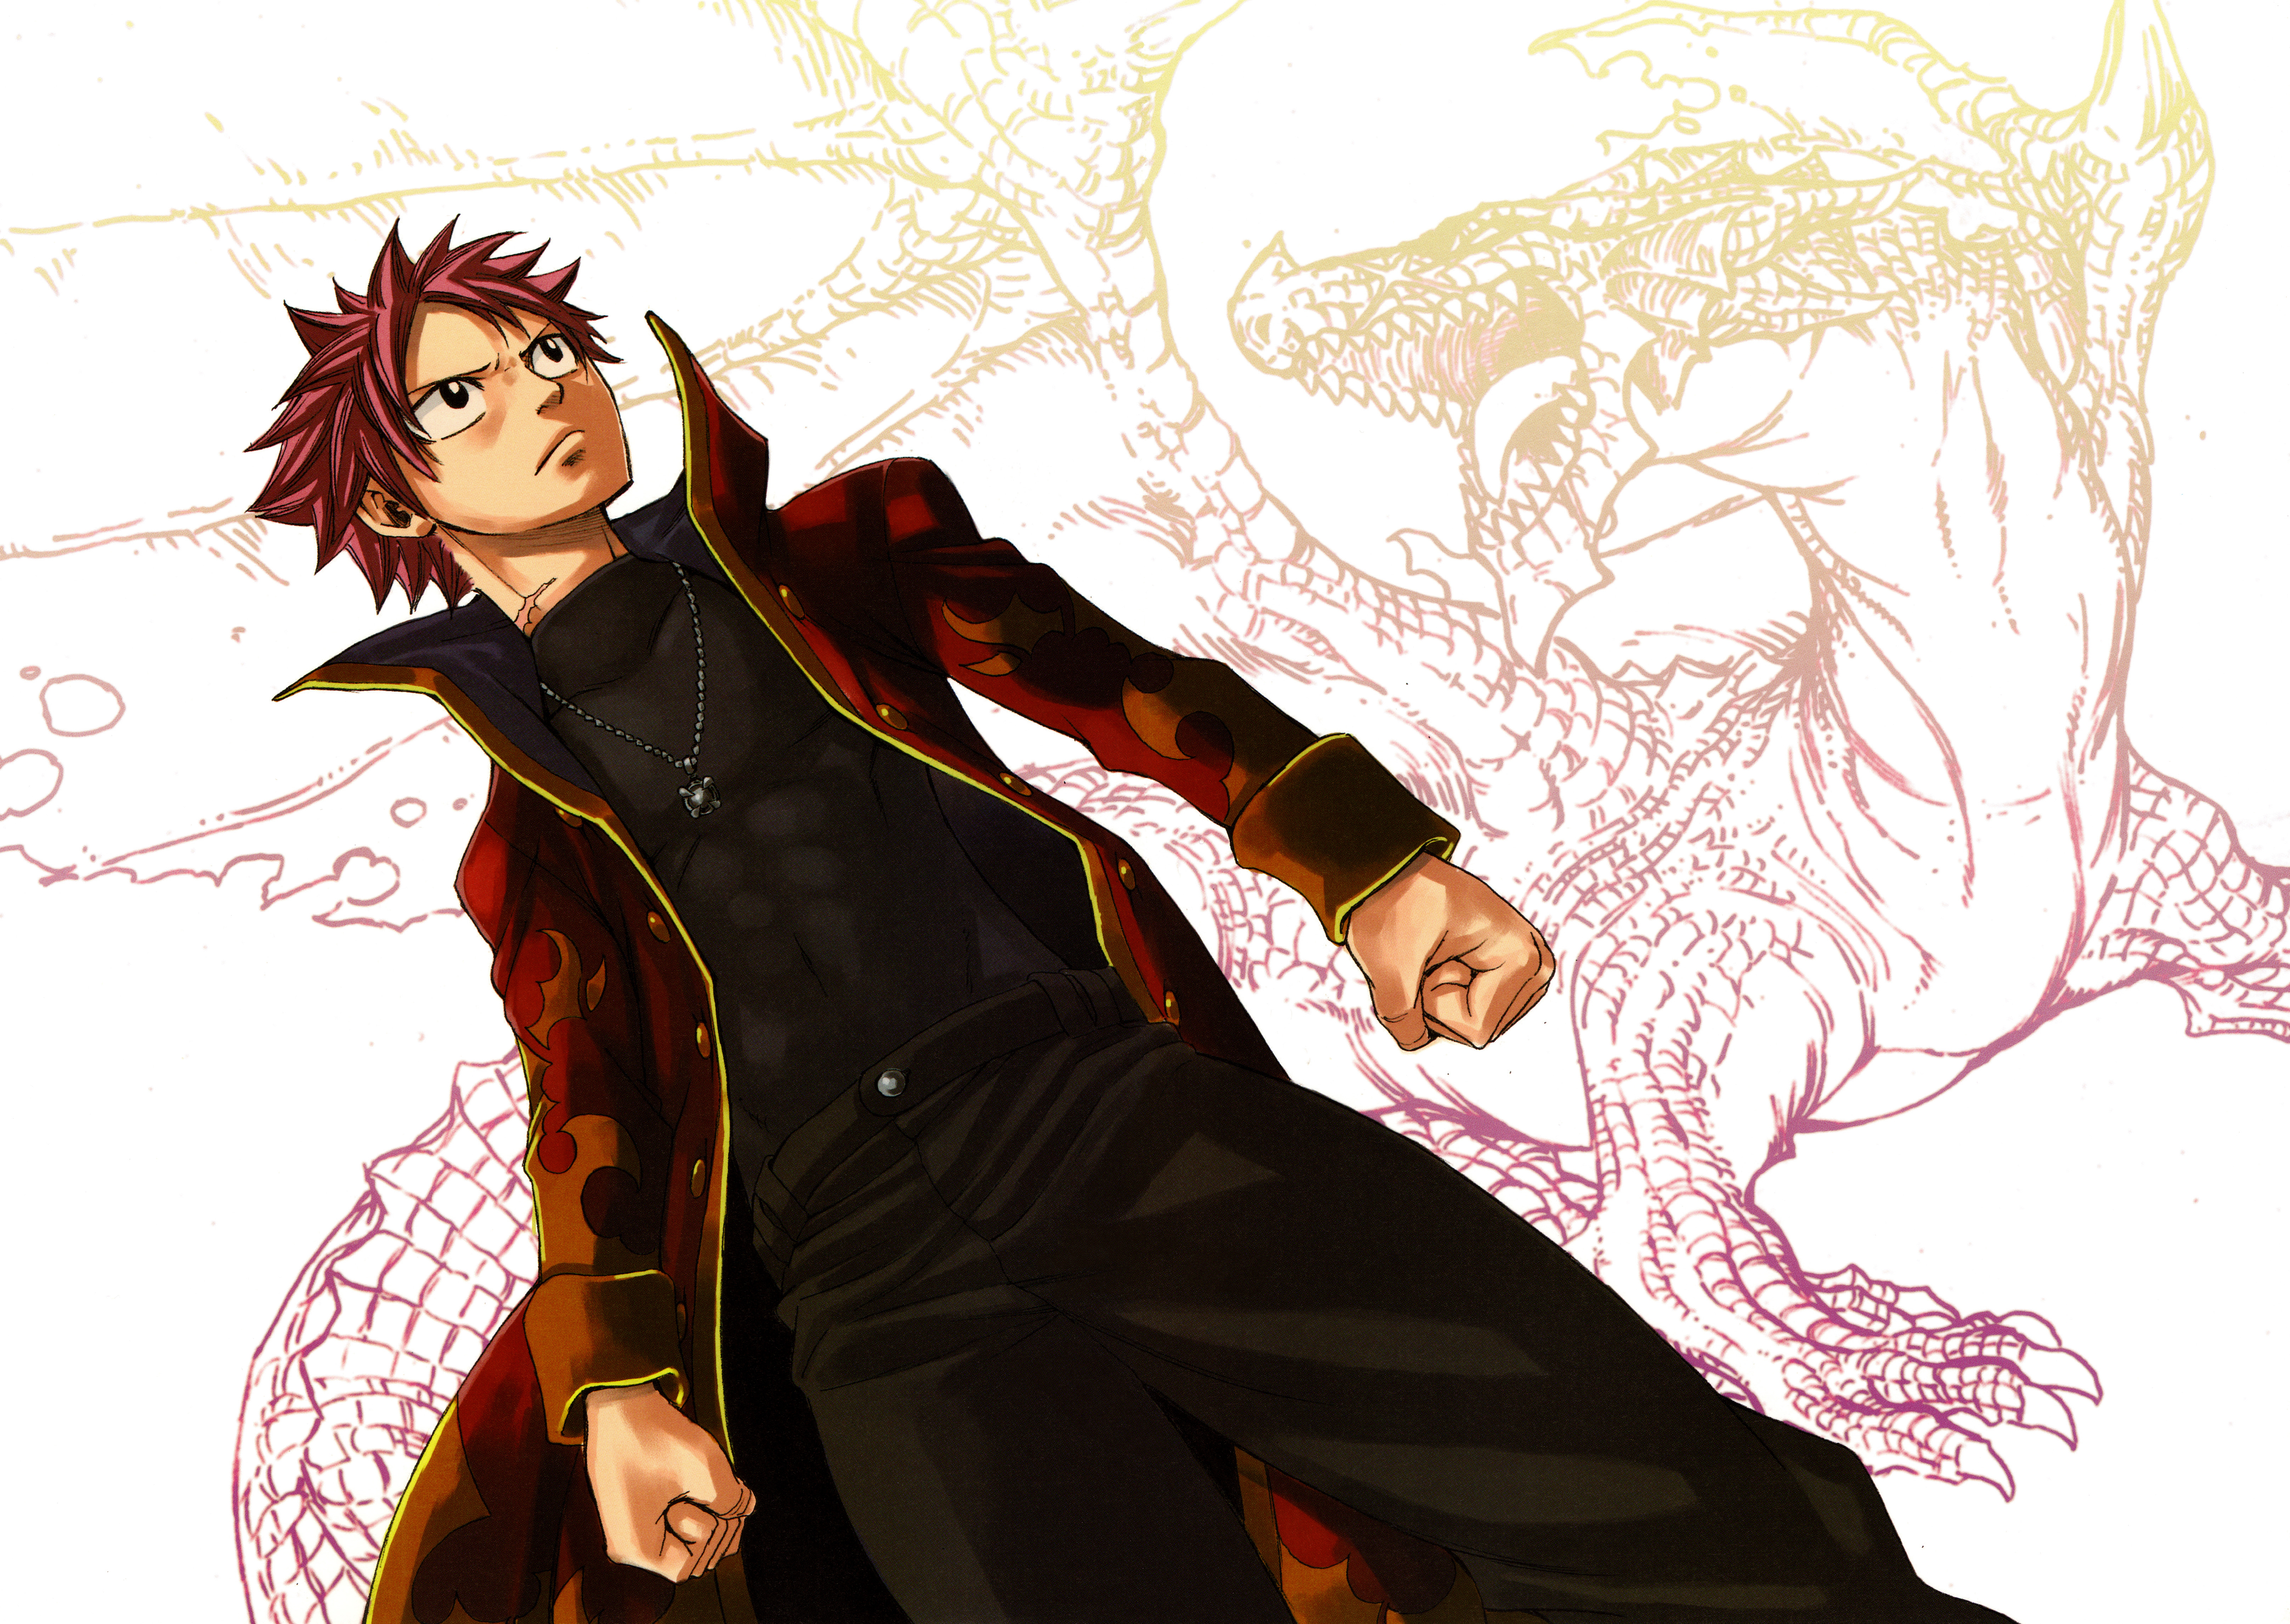 670+ Natsu Dragneel HD Wallpapers and